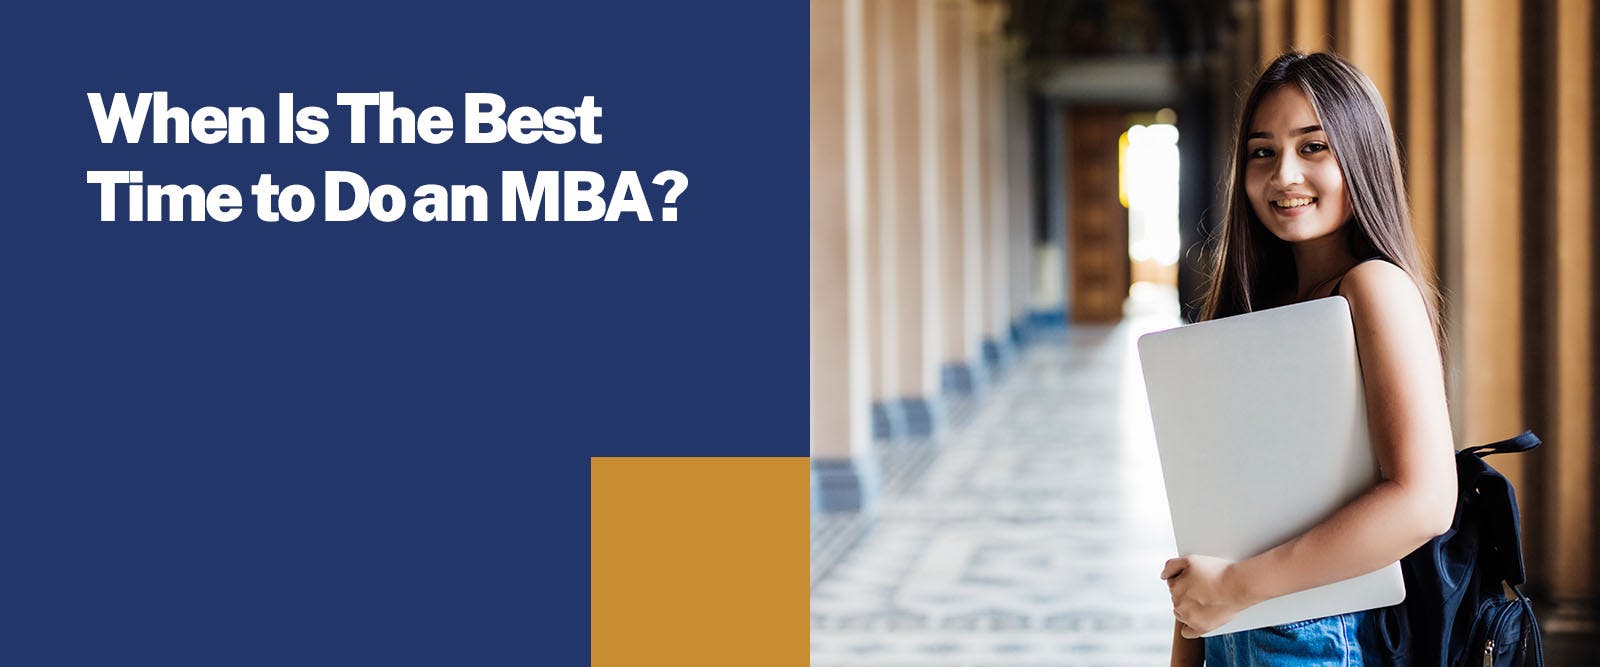 When Is The Best Time to Do an MBA